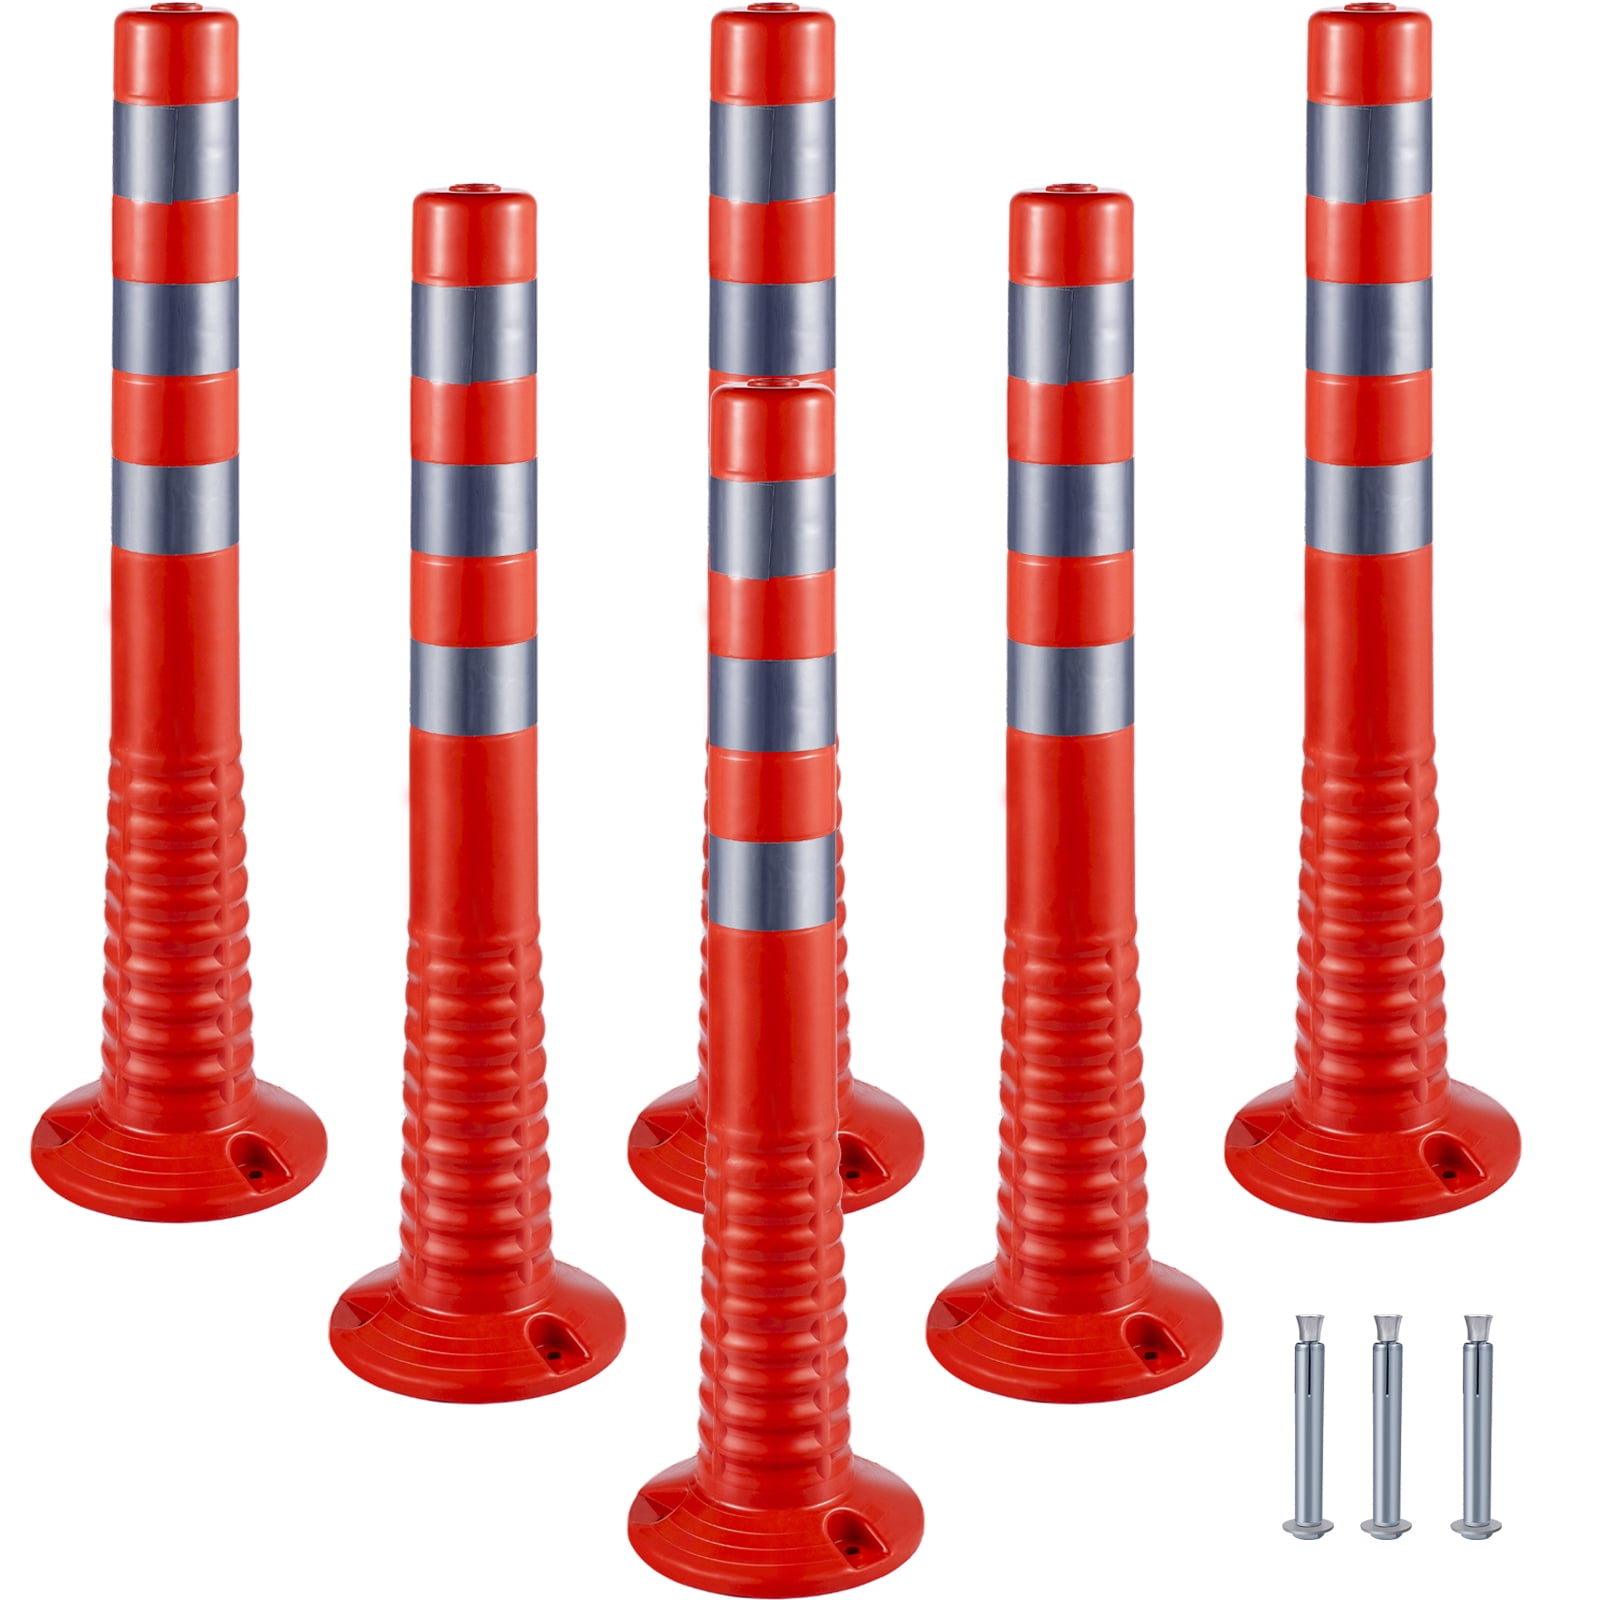 PowerFlare® Cone-Top Adapter - Traffic Safety Corp.